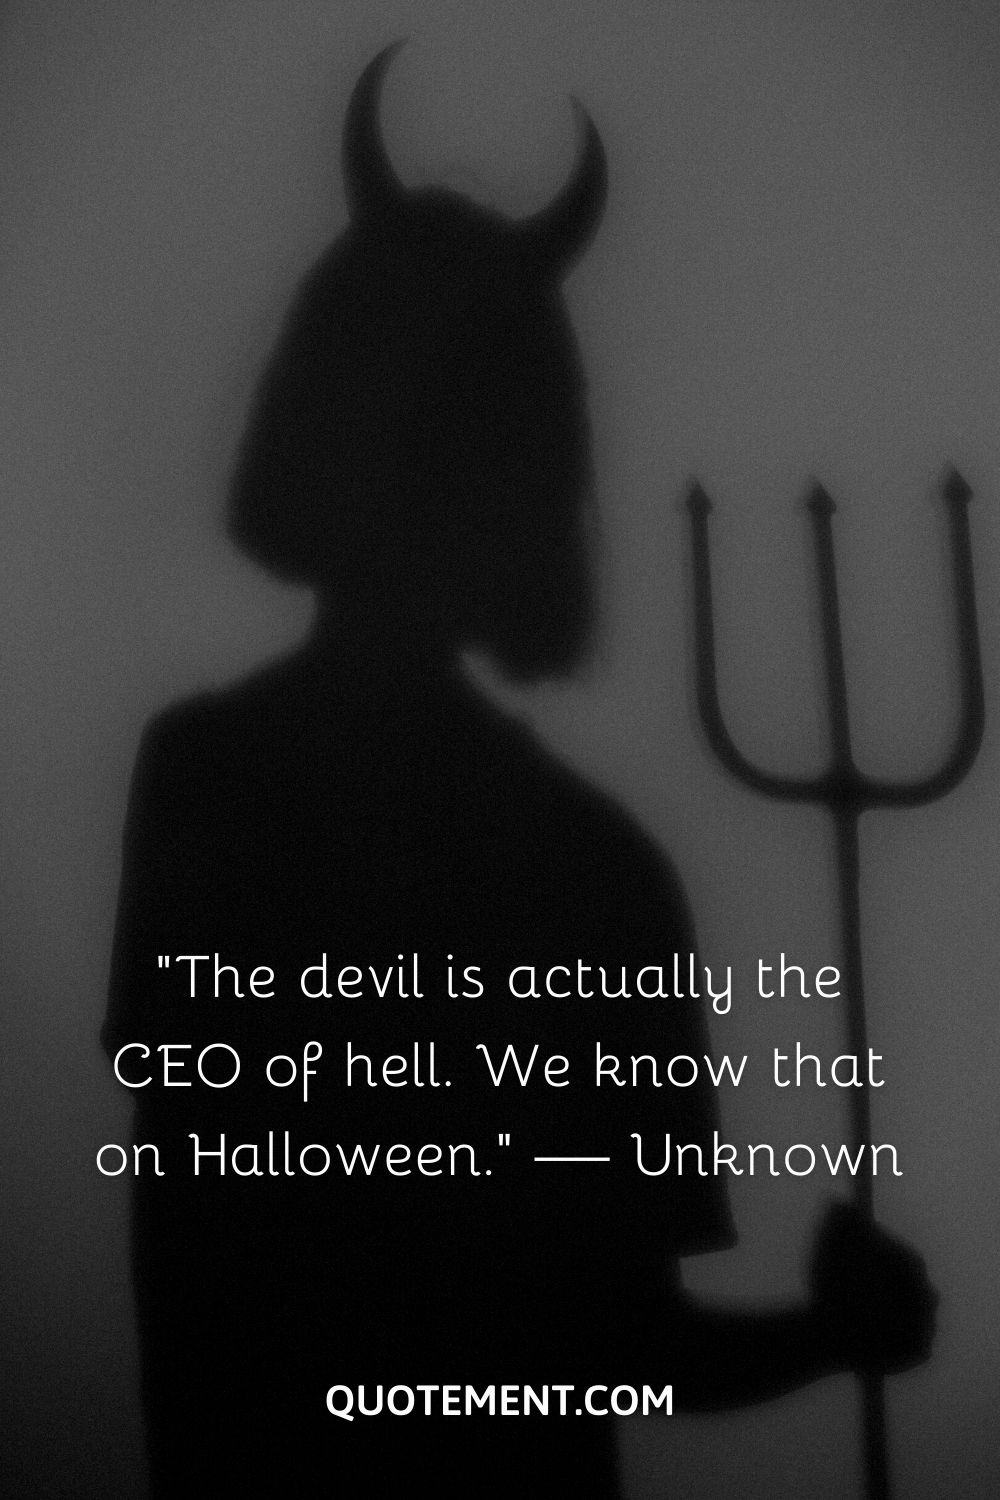 “The devil is actually the CEO of hell. We know that on Halloween.” — Unknown